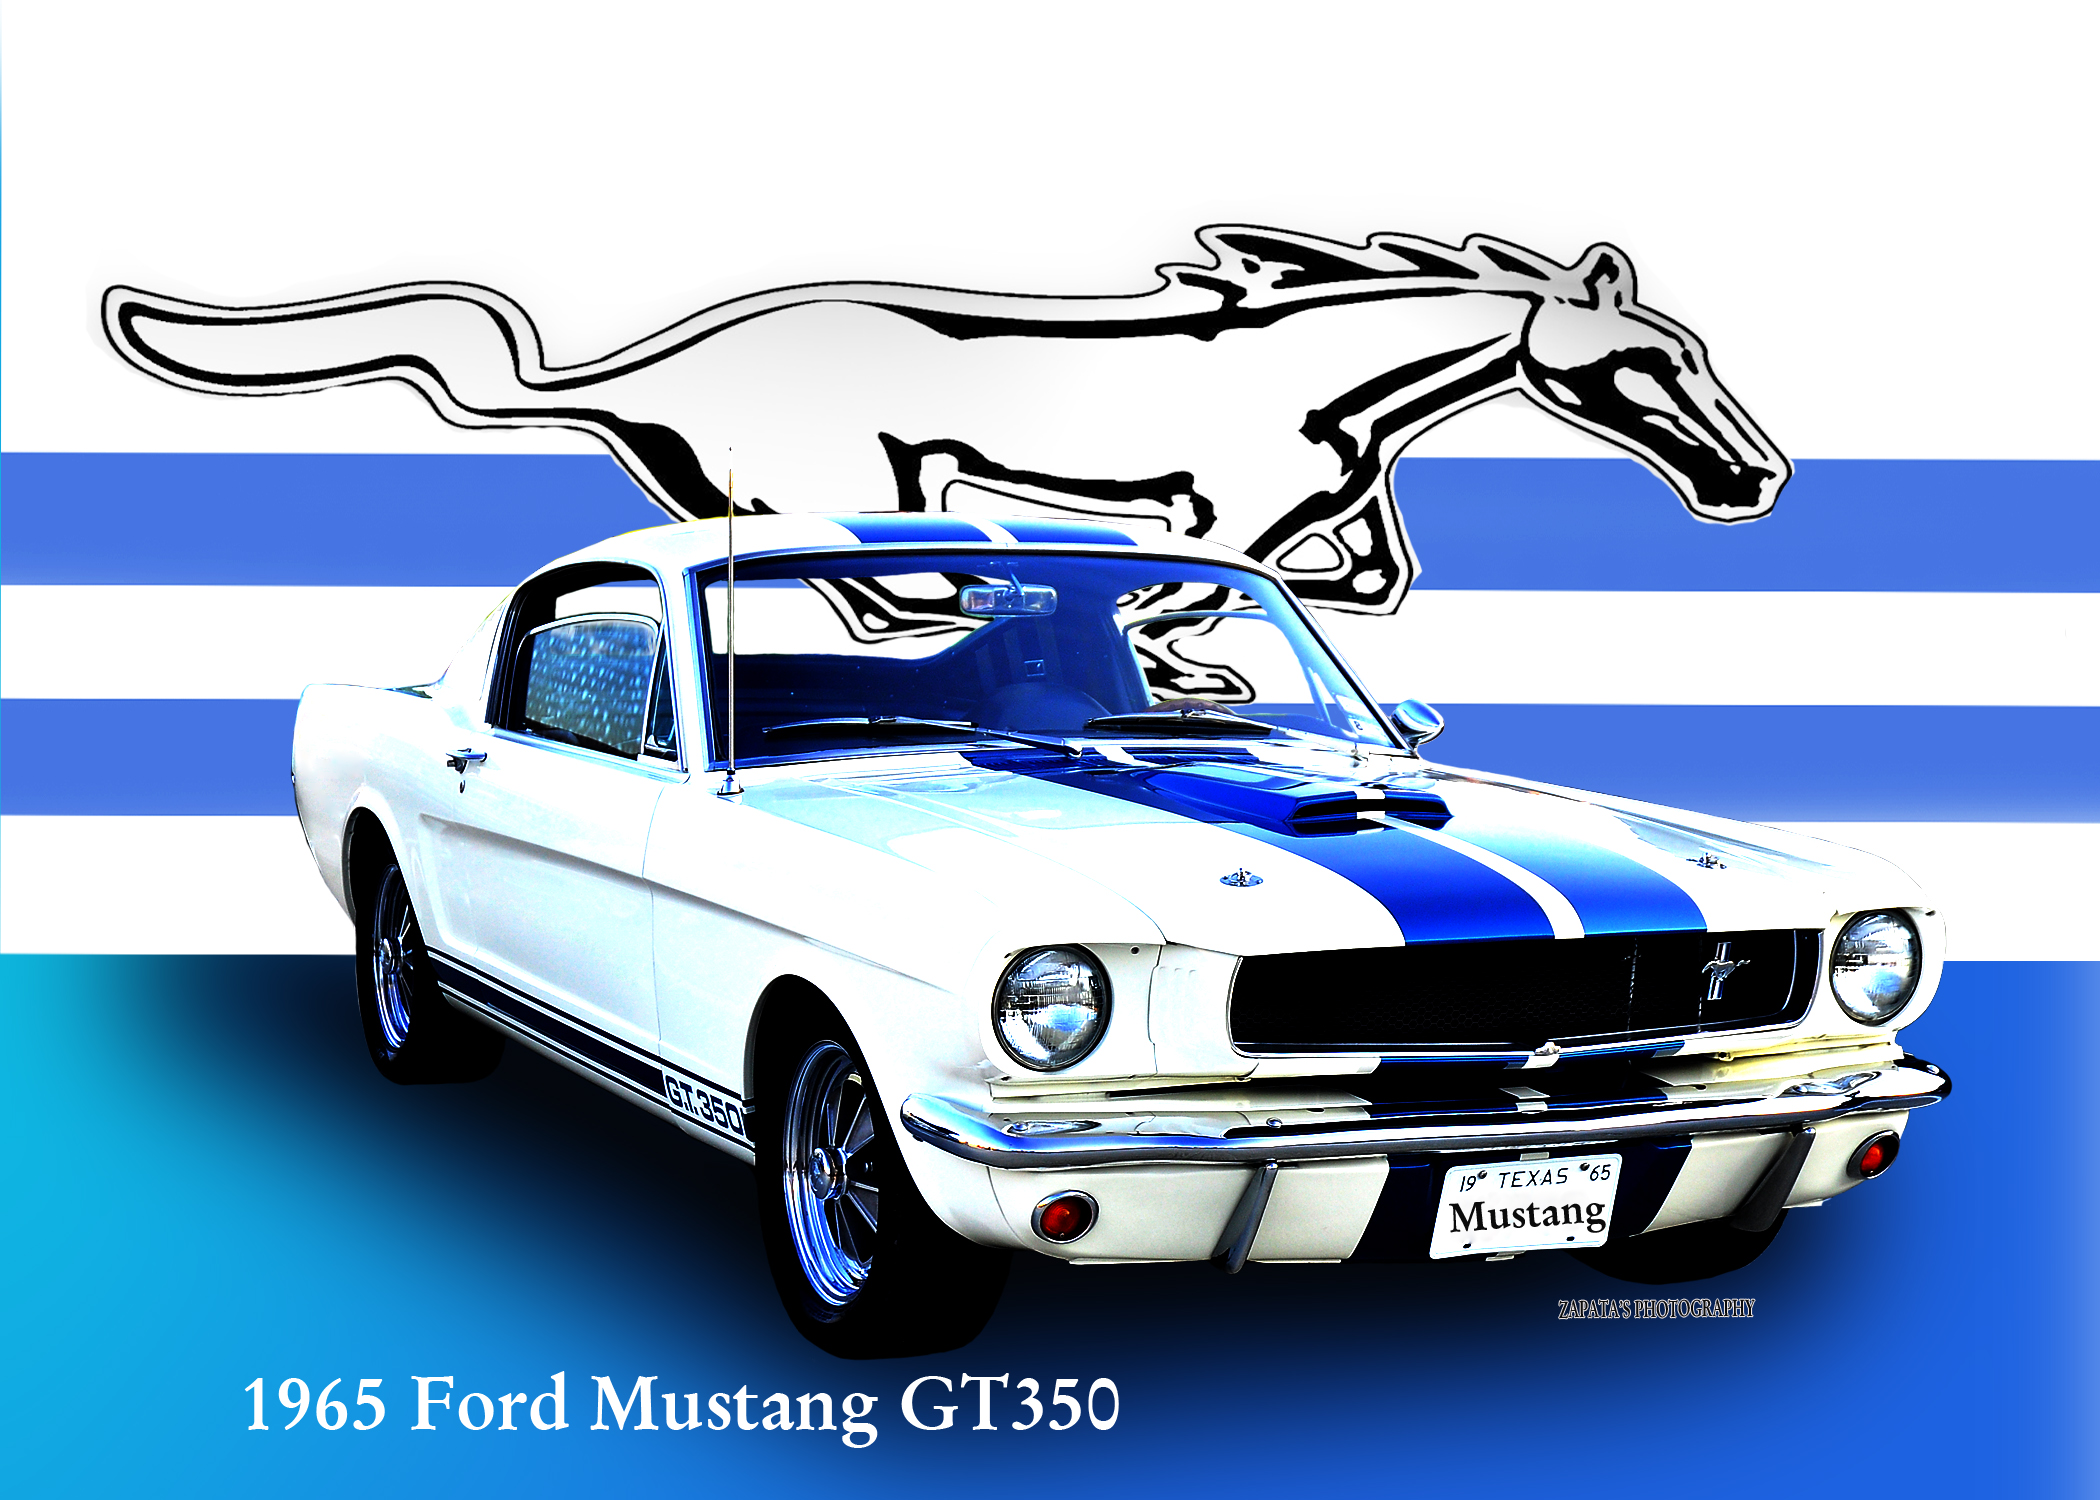 Mustang Gt350 The Ford Spy Photos Of